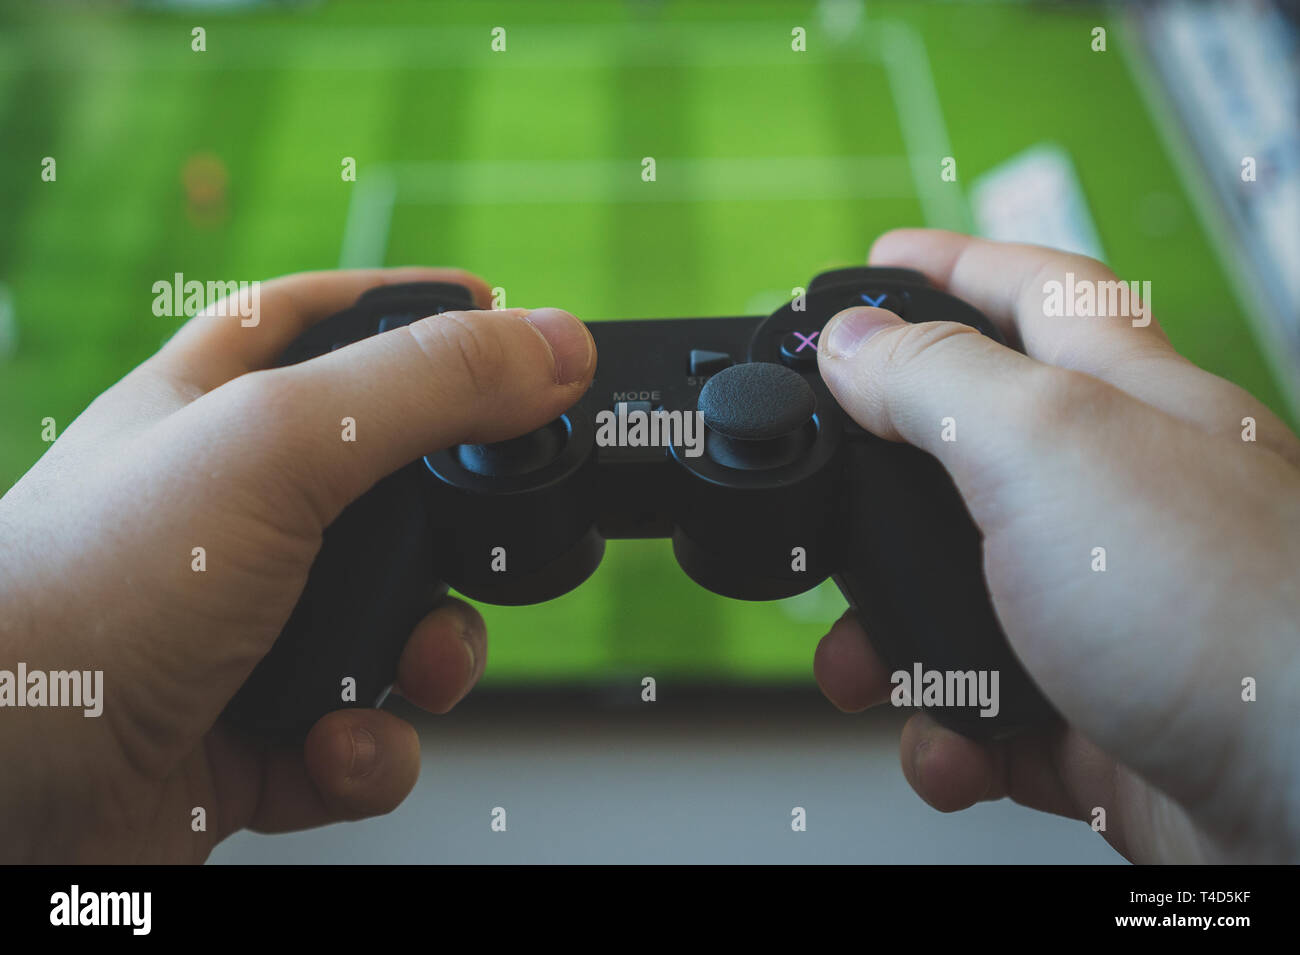 Man playing soccer video game on TV. Gamepad controller in hands Stock  Photo - Alamy